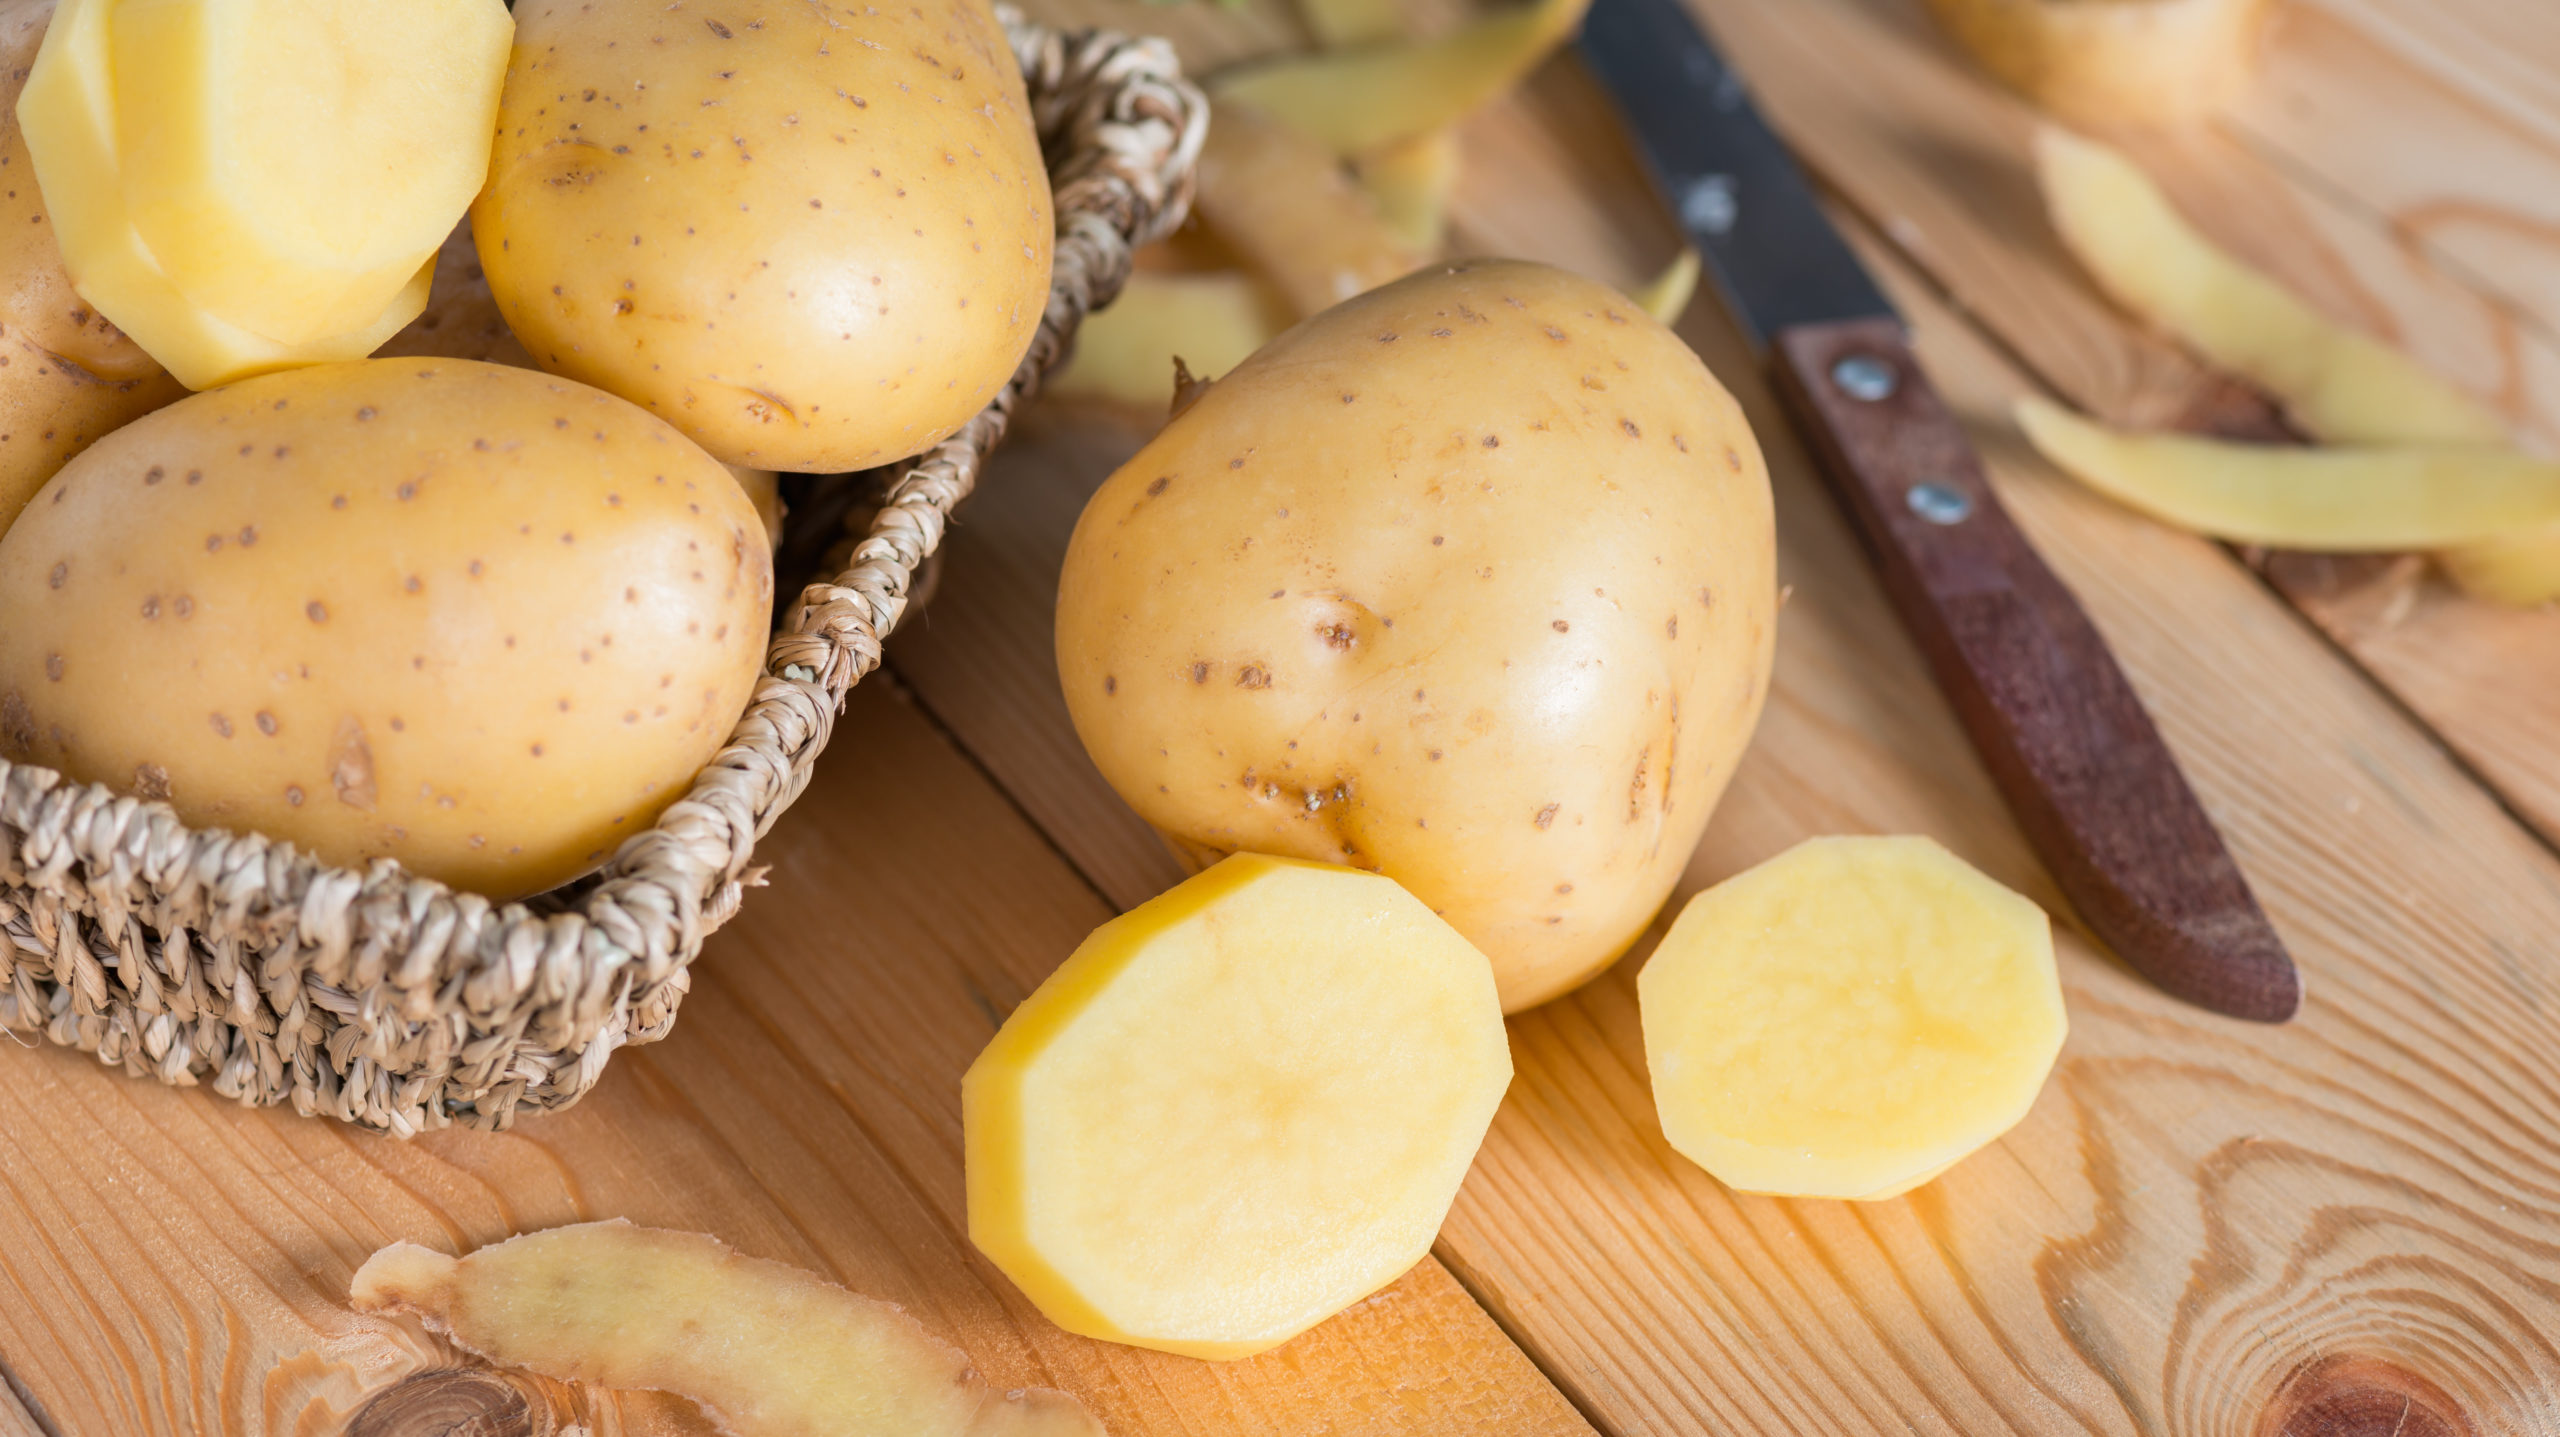 Can a Raw Potato Fix Food That’s Too Salty?